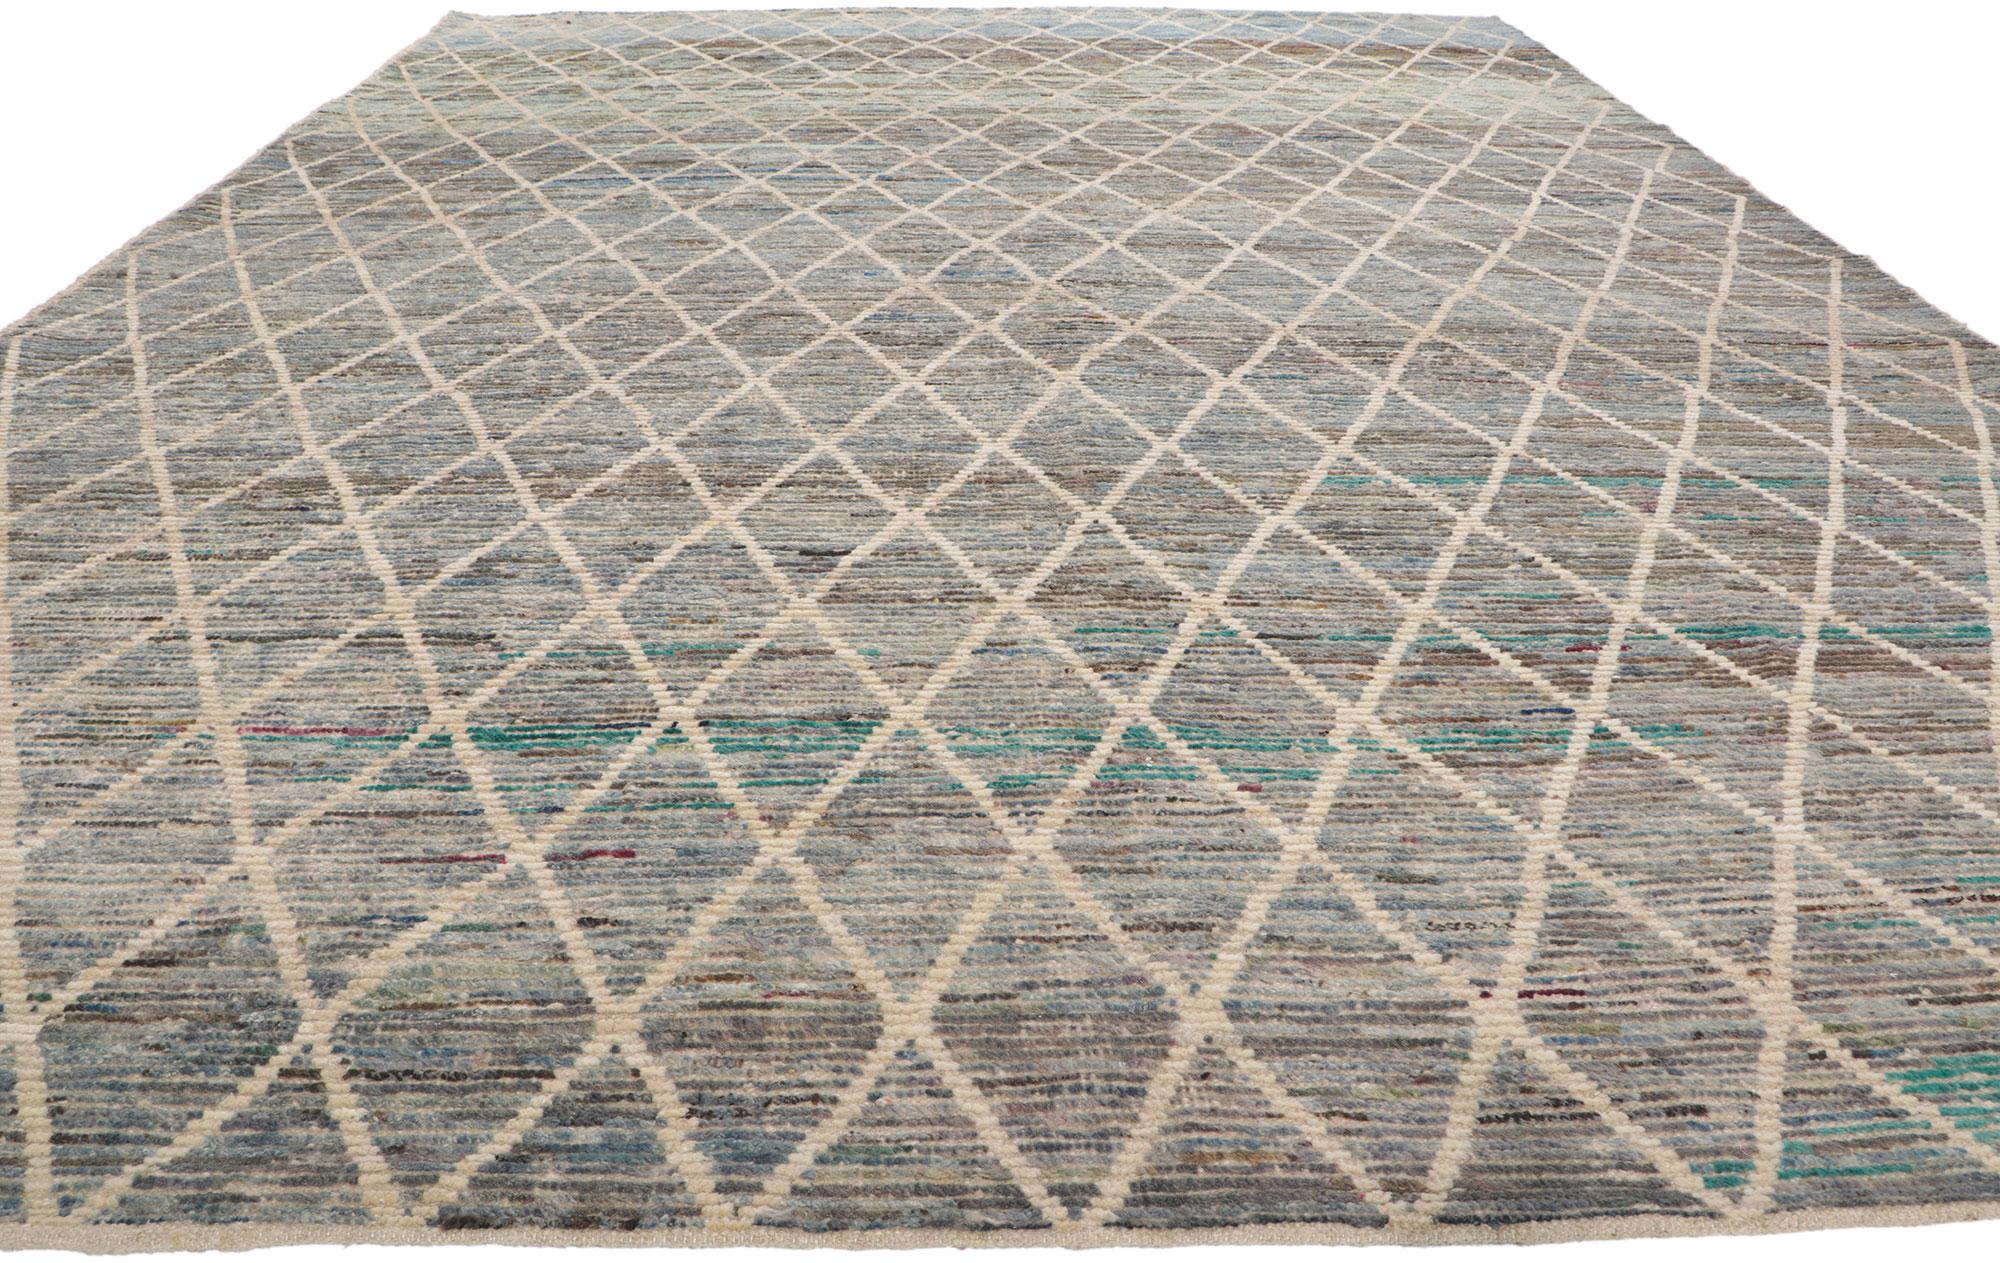 Pakistani Large Modern Earth-Tone Moroccan Rug, Nature-Inspired Color Palette